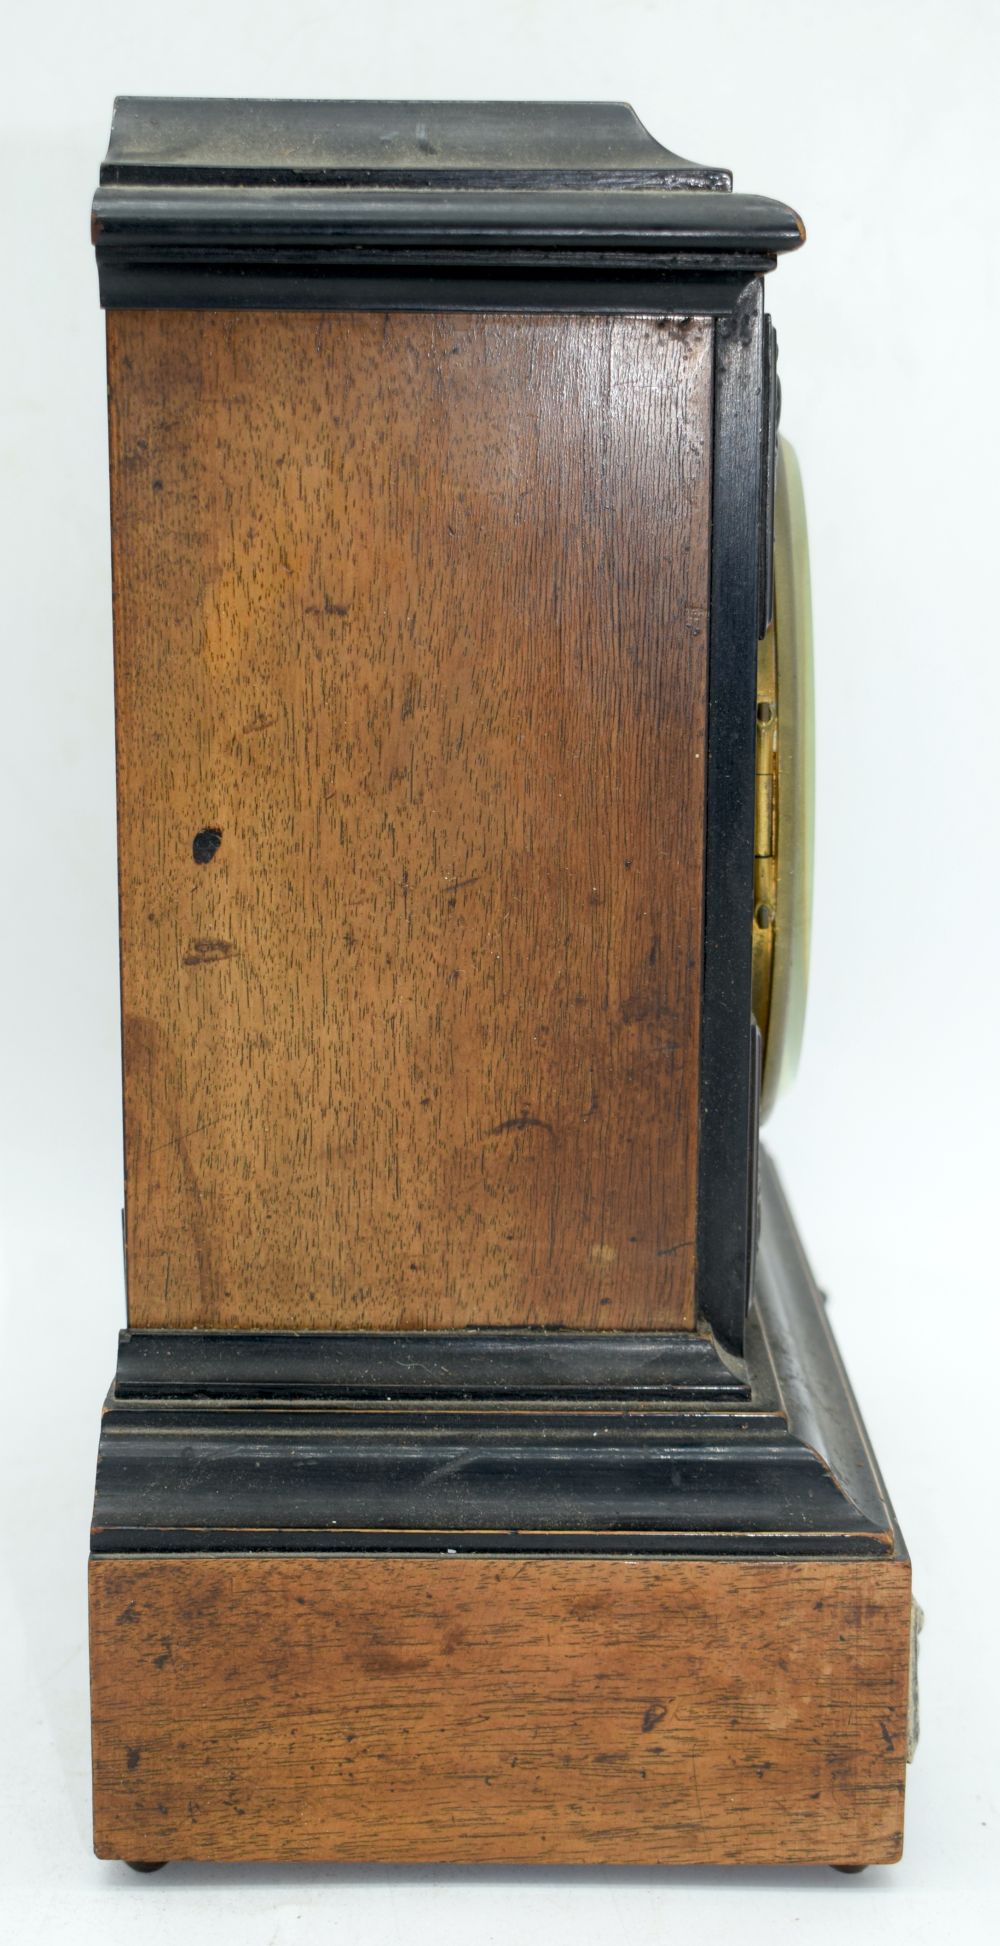 A wooden Mid Century mantle clock with metal enamelled face 53 x 29 x 15 cm. - Image 3 of 5